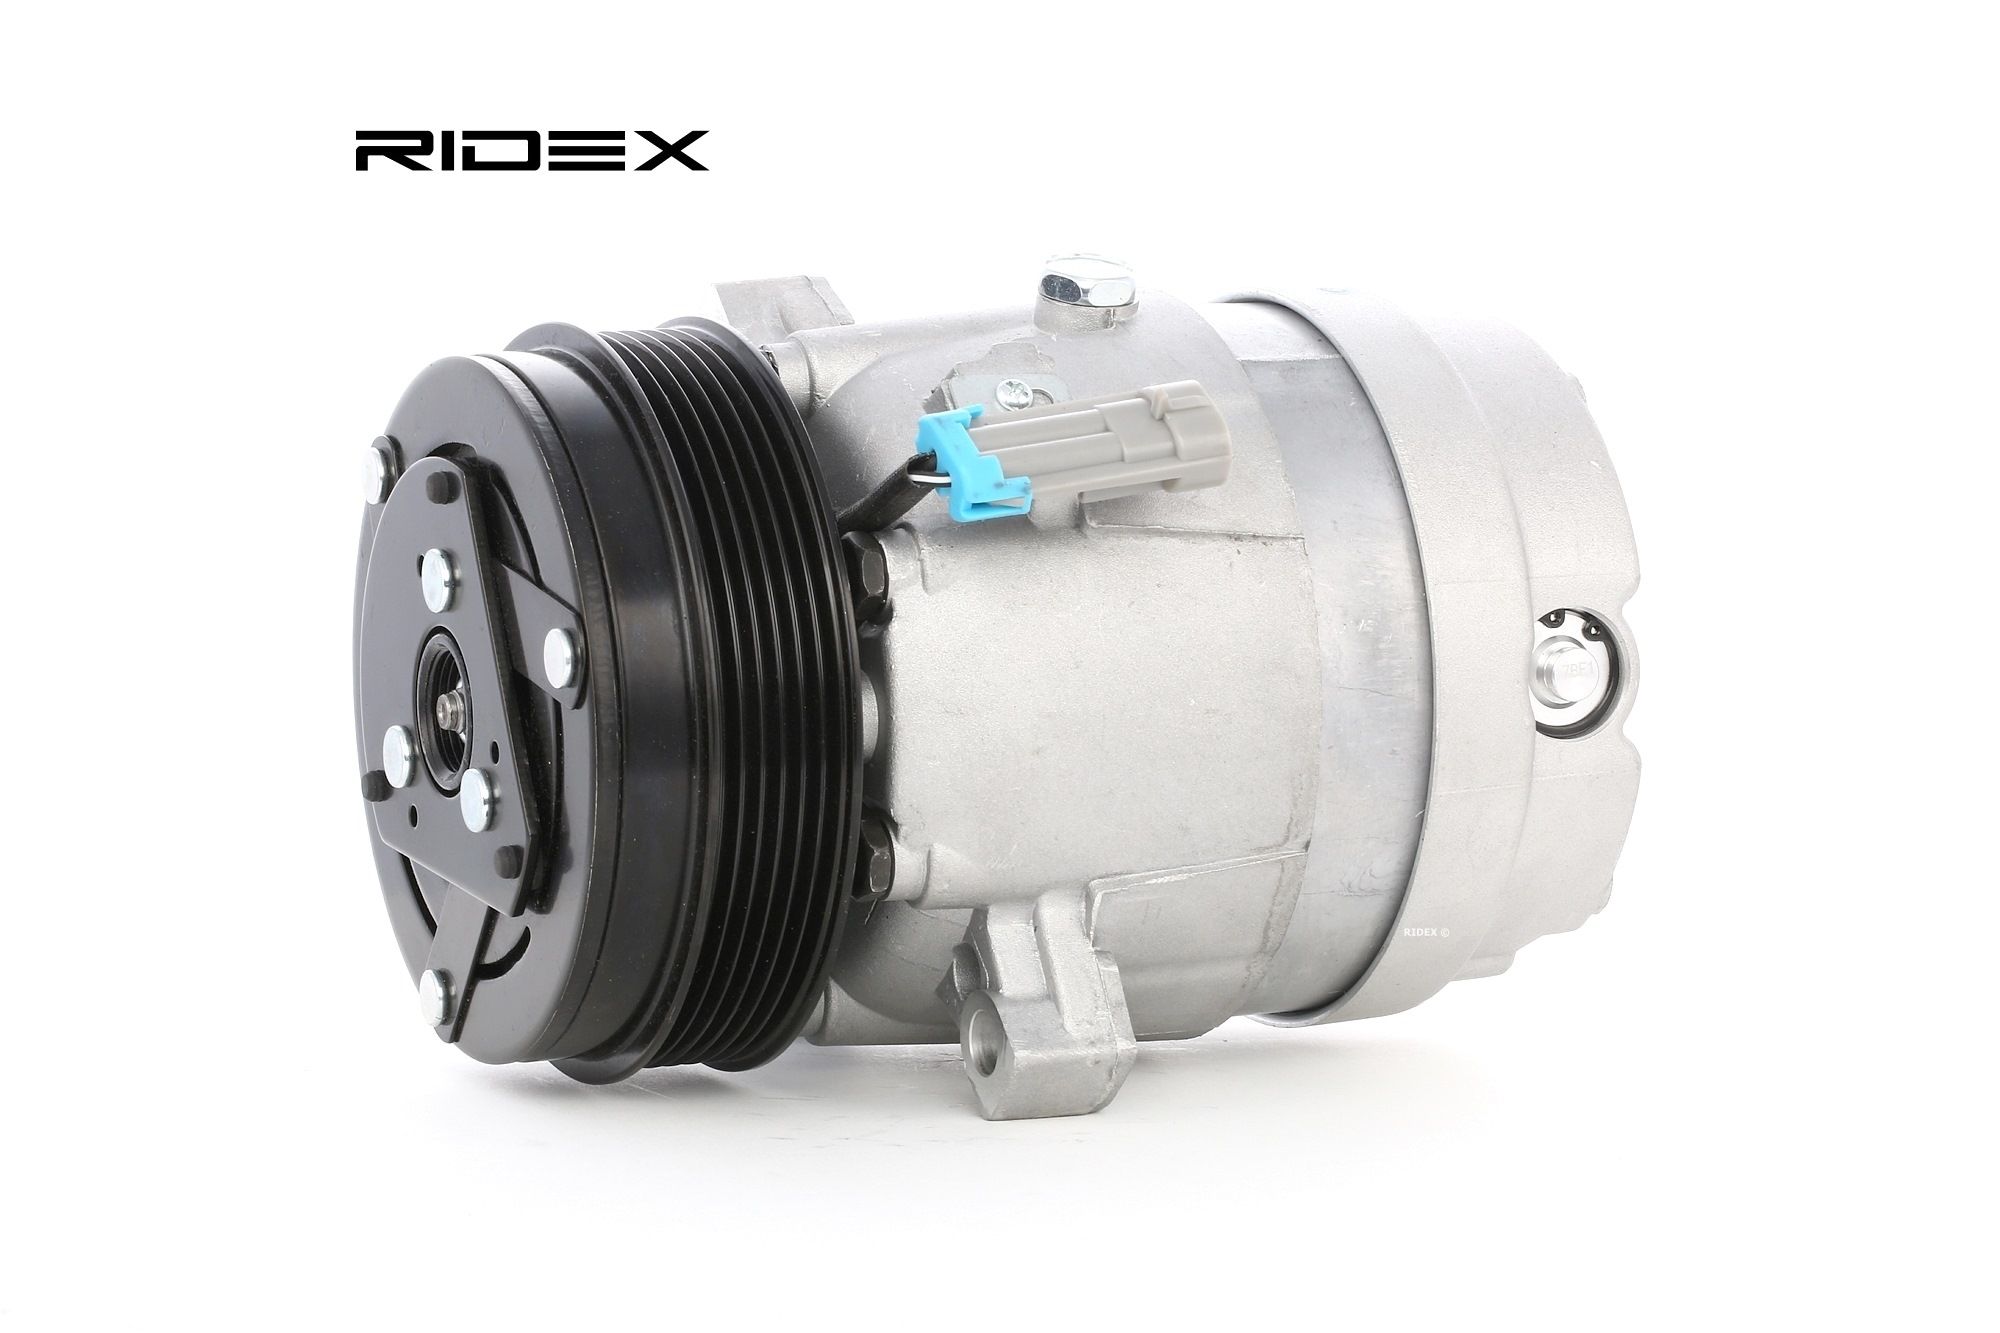 RIDEX 447K0091 Air conditioning compressor V5, PAG 100, R 134a, with PAG compressor oil